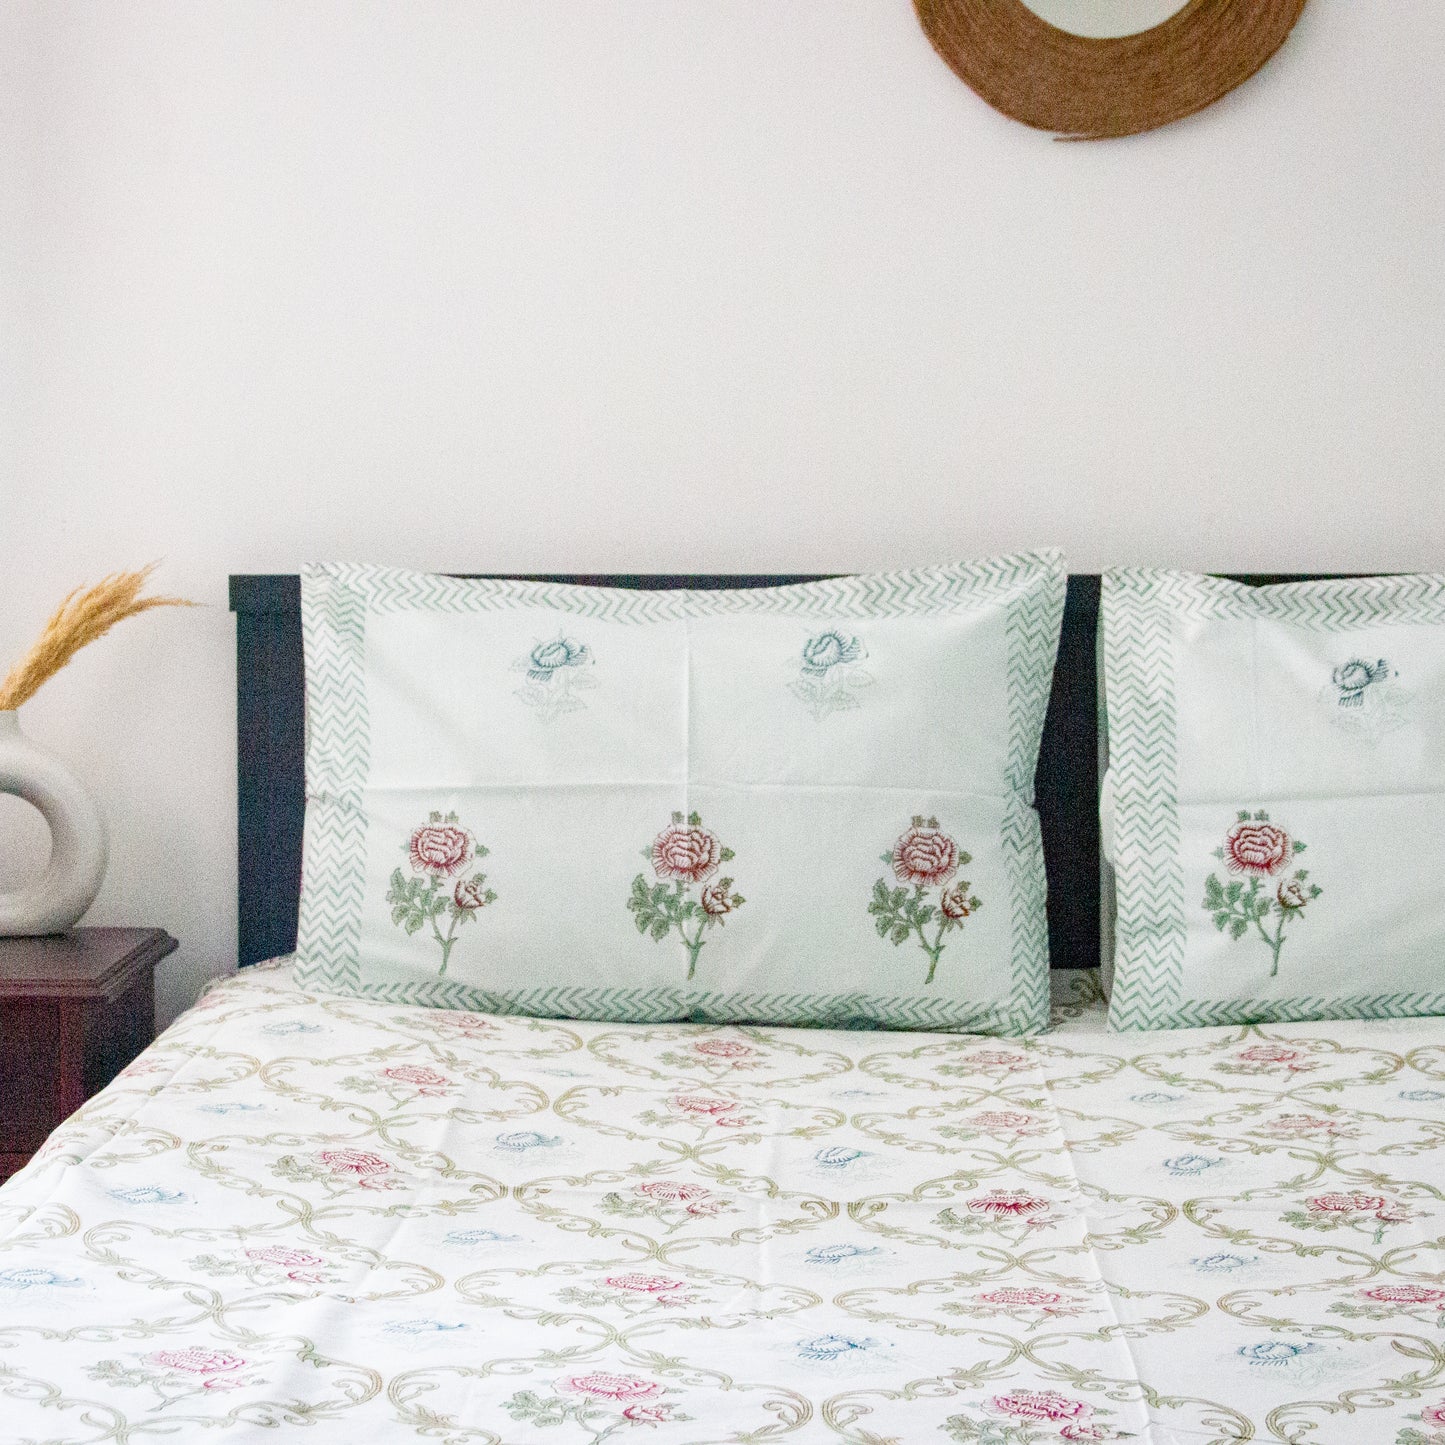 Wisteria Hand Block Printed Bed Sheets